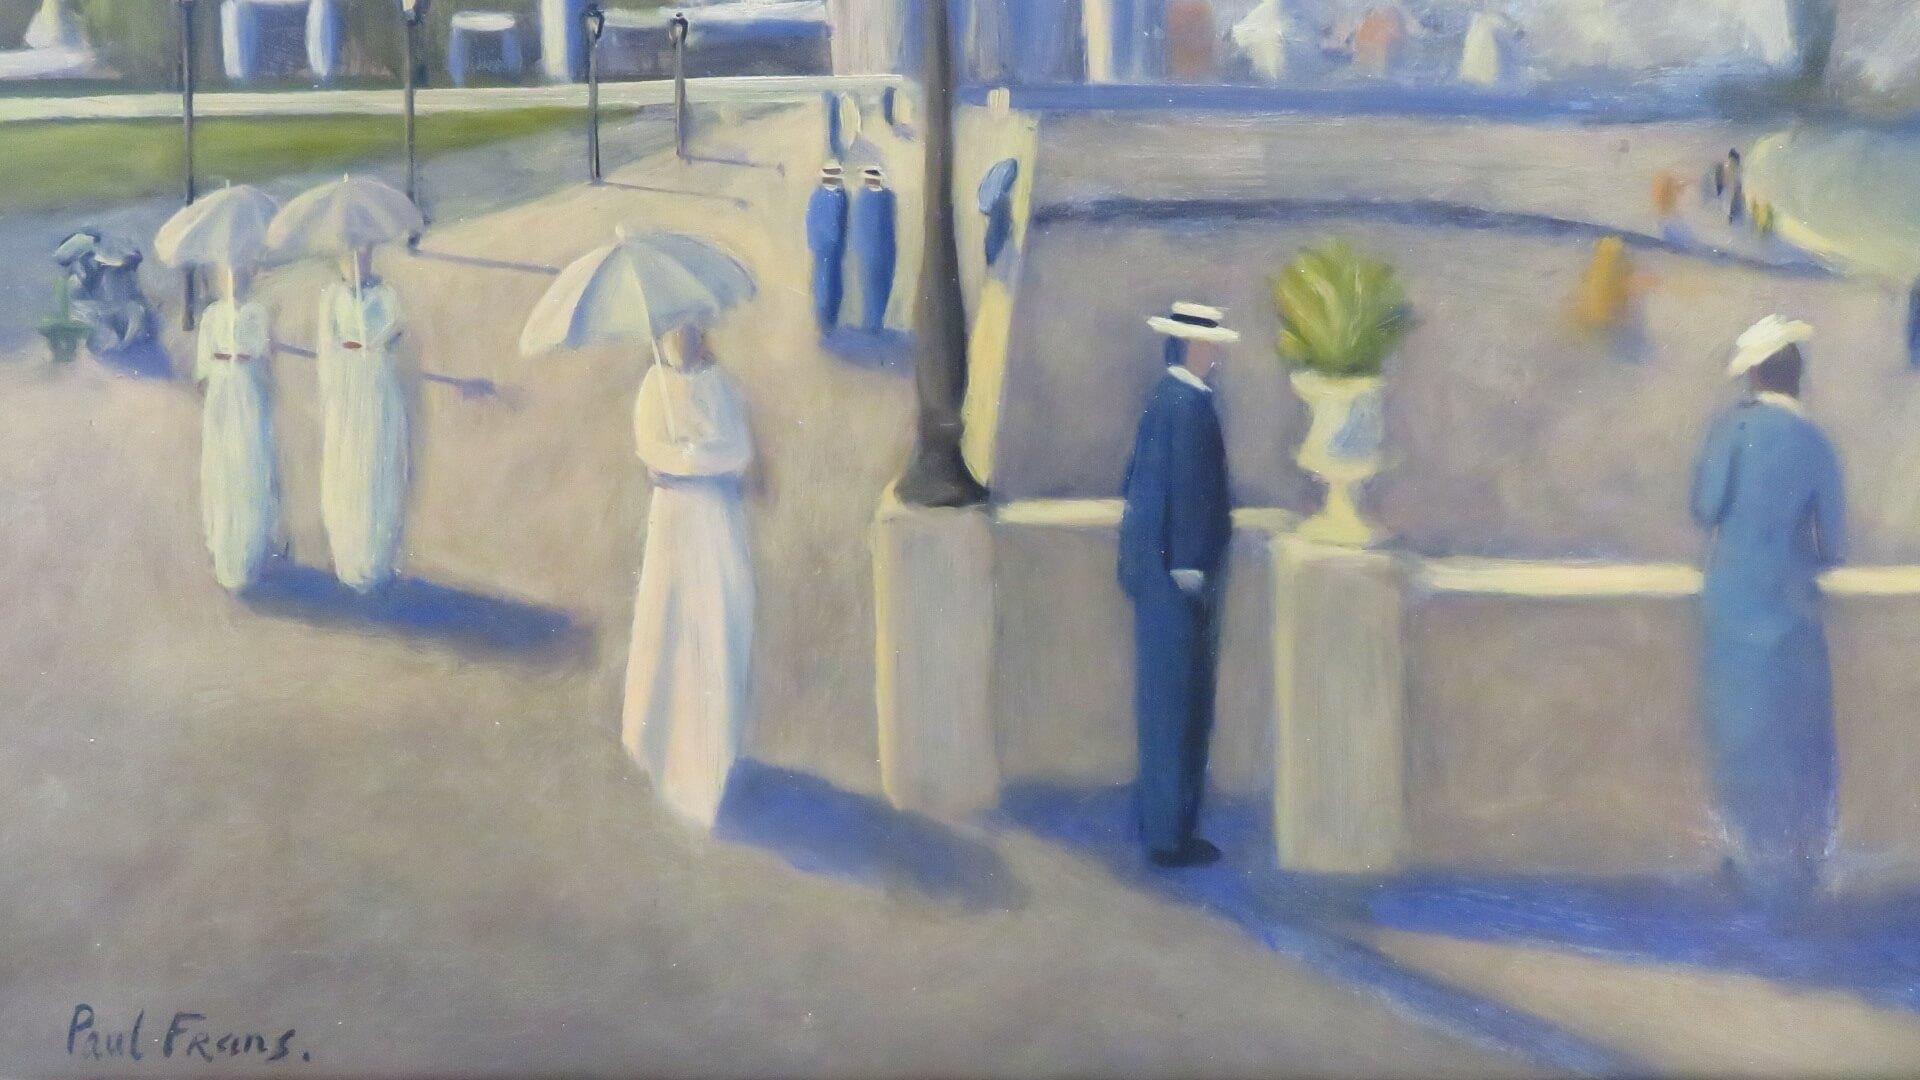 ARTIST: Paul Frans (1958-) Belgium

TITLE: “French Promenade Scene” (probably Deaville)

SIGNED: lower left

MEDIUM: oil on canvas

SIZE: 75cm x 50cm inc frame

CONDITION: excellent

DETAIL: Frans was born in Belgium in 1958, he later moved to